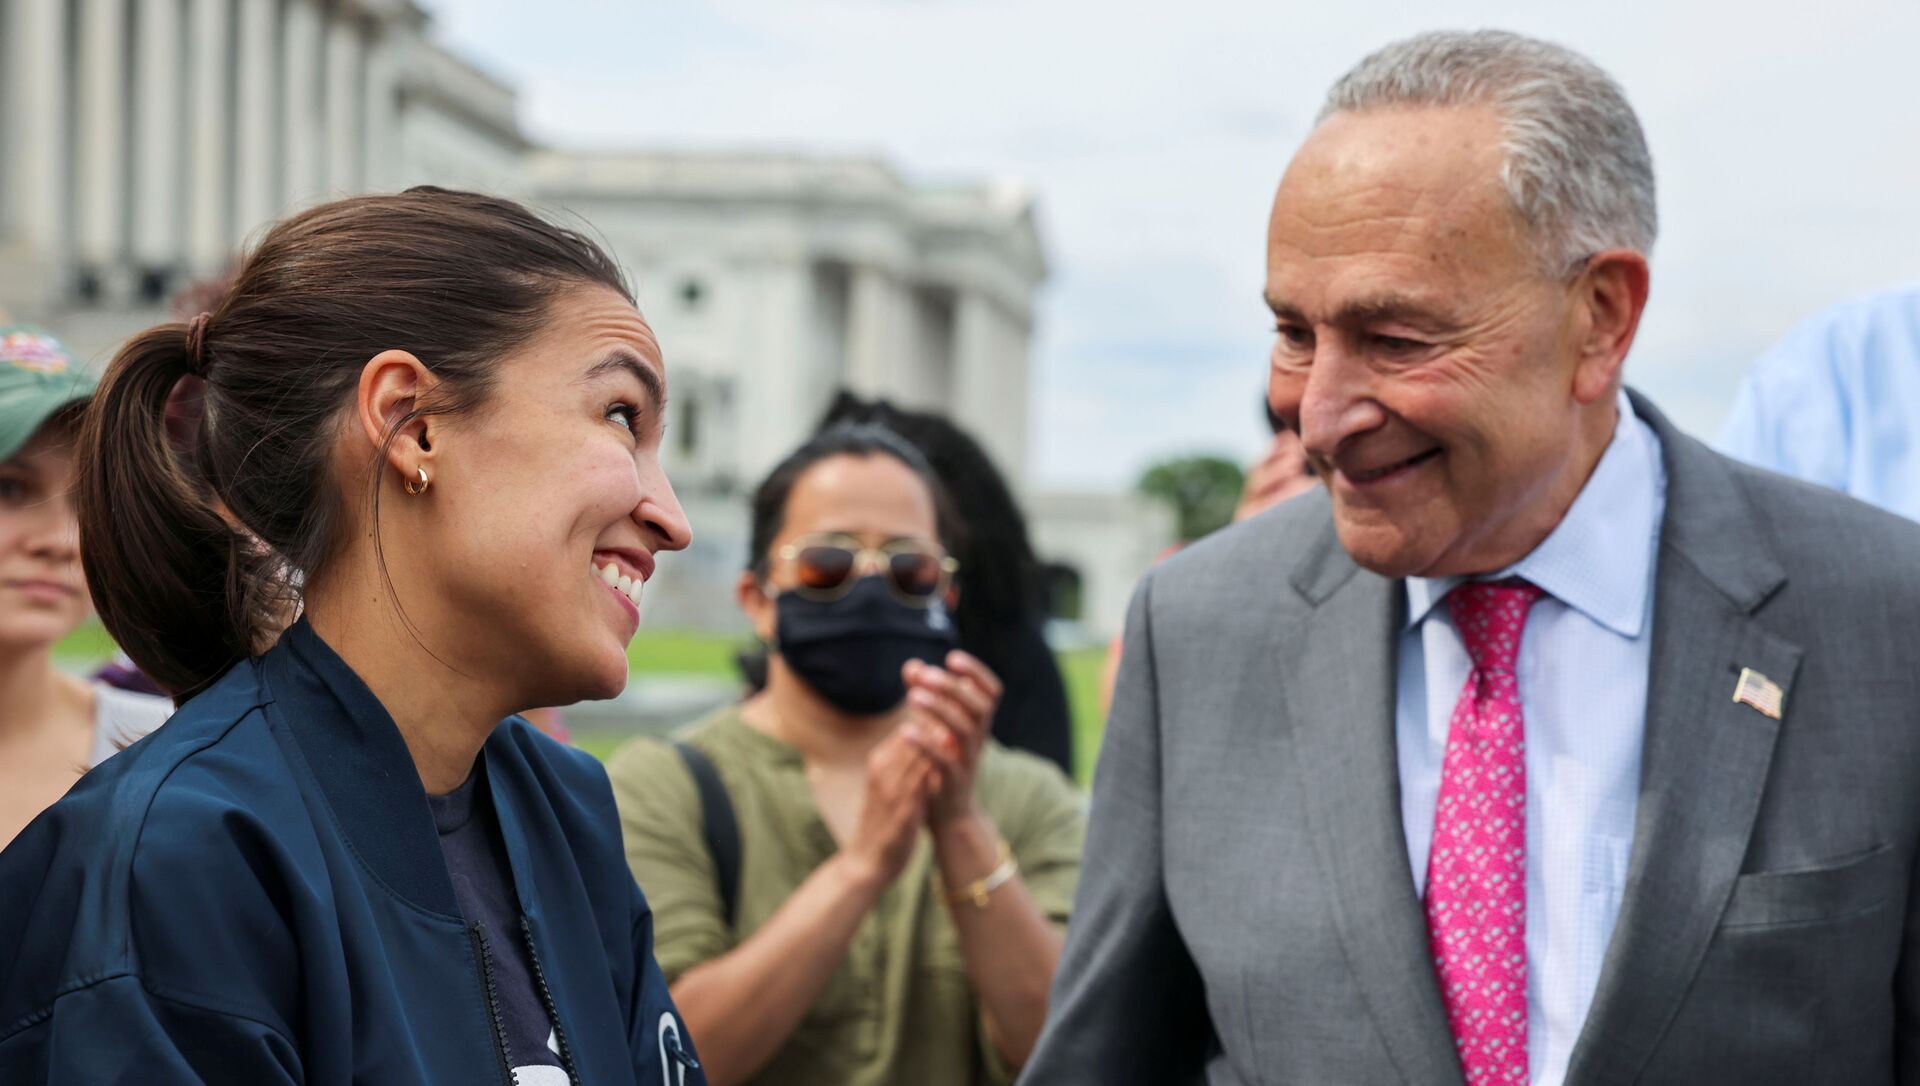 U.S. Representative Alexandria Ocasio-Cortez (D-NY) talks with U.S. Senate Majority Leader Chuck Schumer (D-NY) as they celebrate outside the U.S. Capitol Building after news that the White House intends to extend the eviction moratorium in place because of the coronavirus disease (COVID-19) pandemic, on Capitol Hill in Washington, U.S., August 3, 2021. - Sputnik International, 1920, 09.08.2021